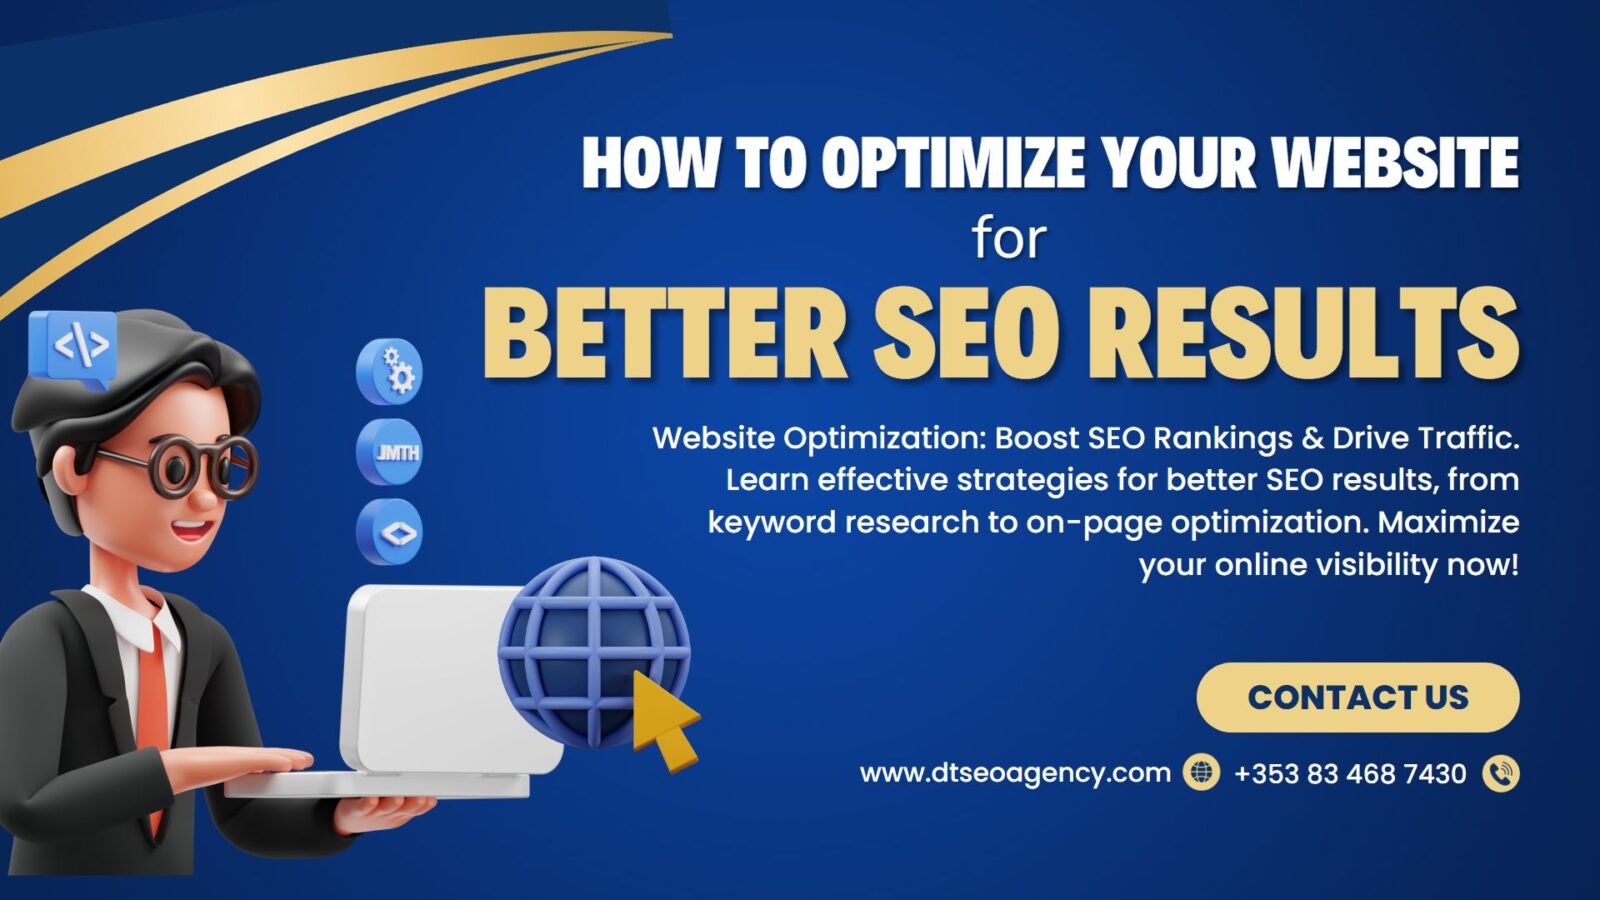 How to Optimize Your Website for Better SEO Results